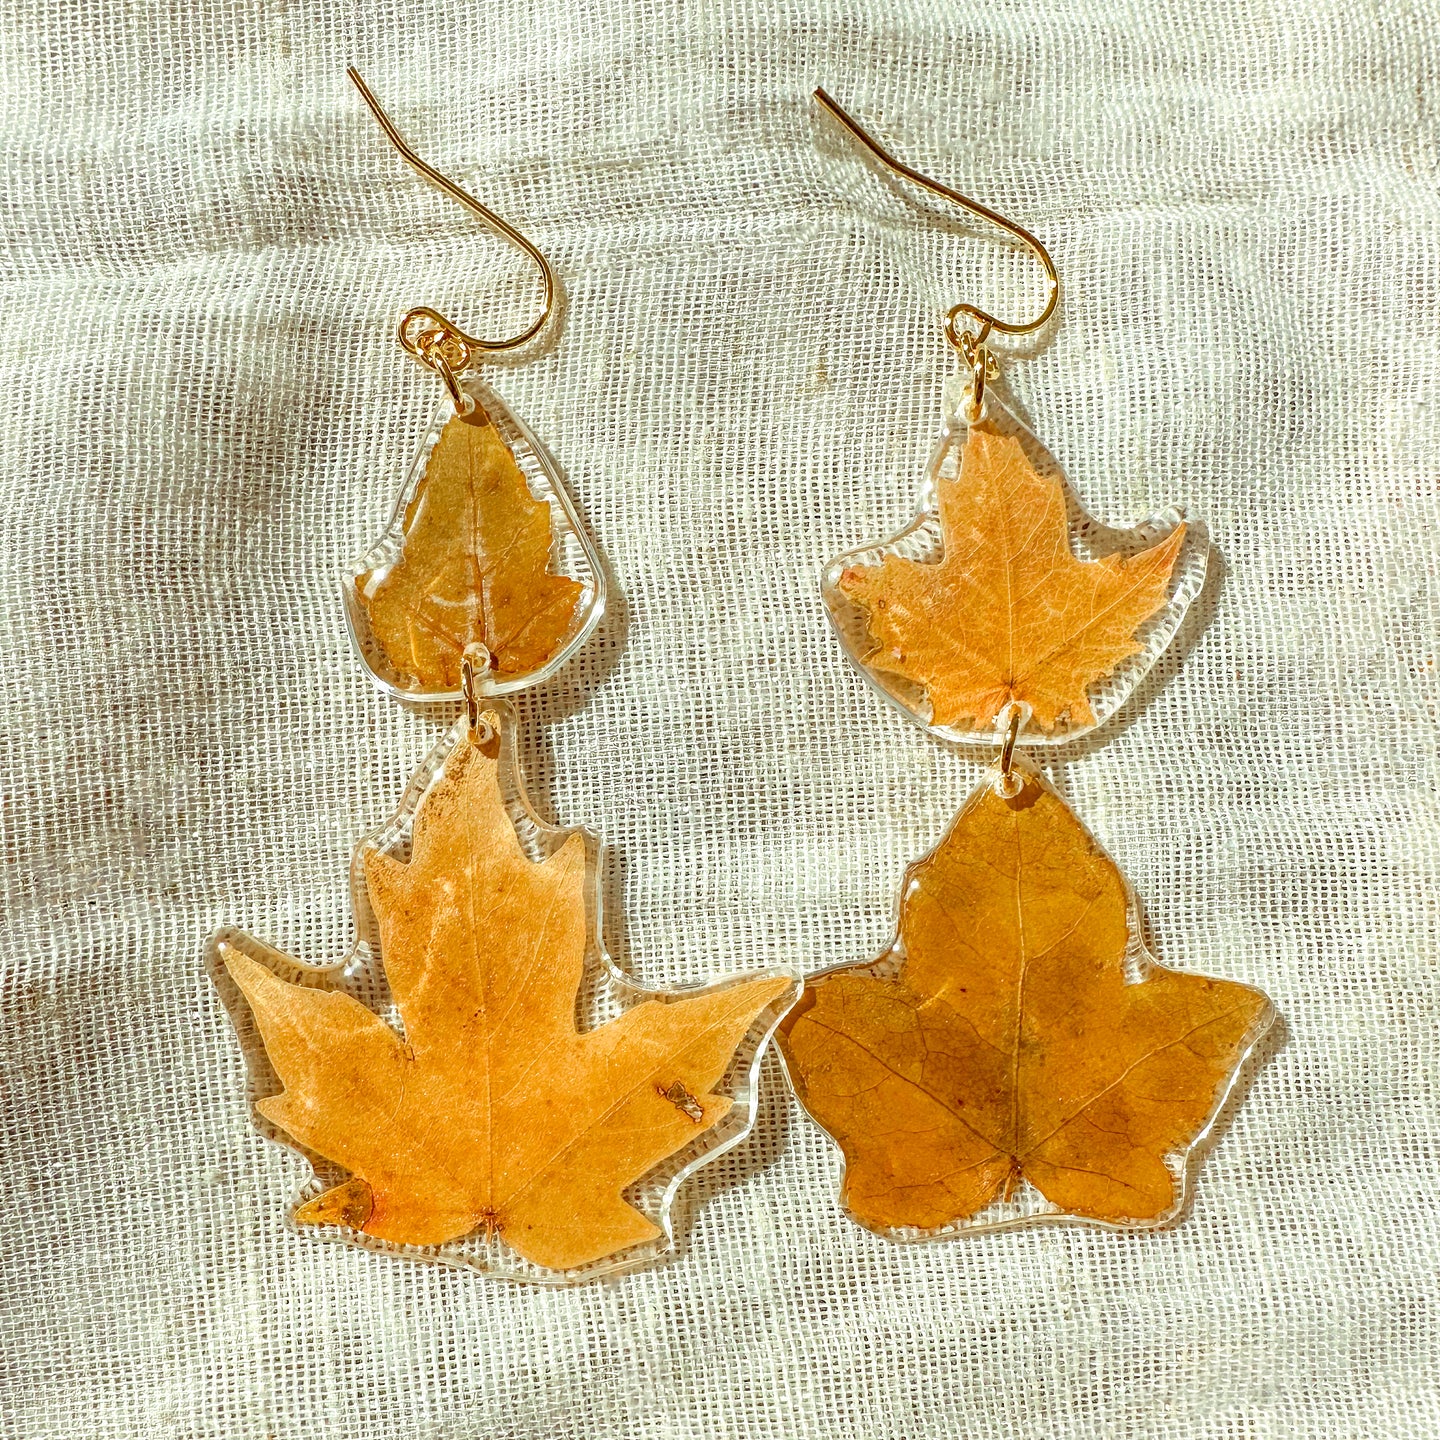 Mismatched double fall leaf earrings